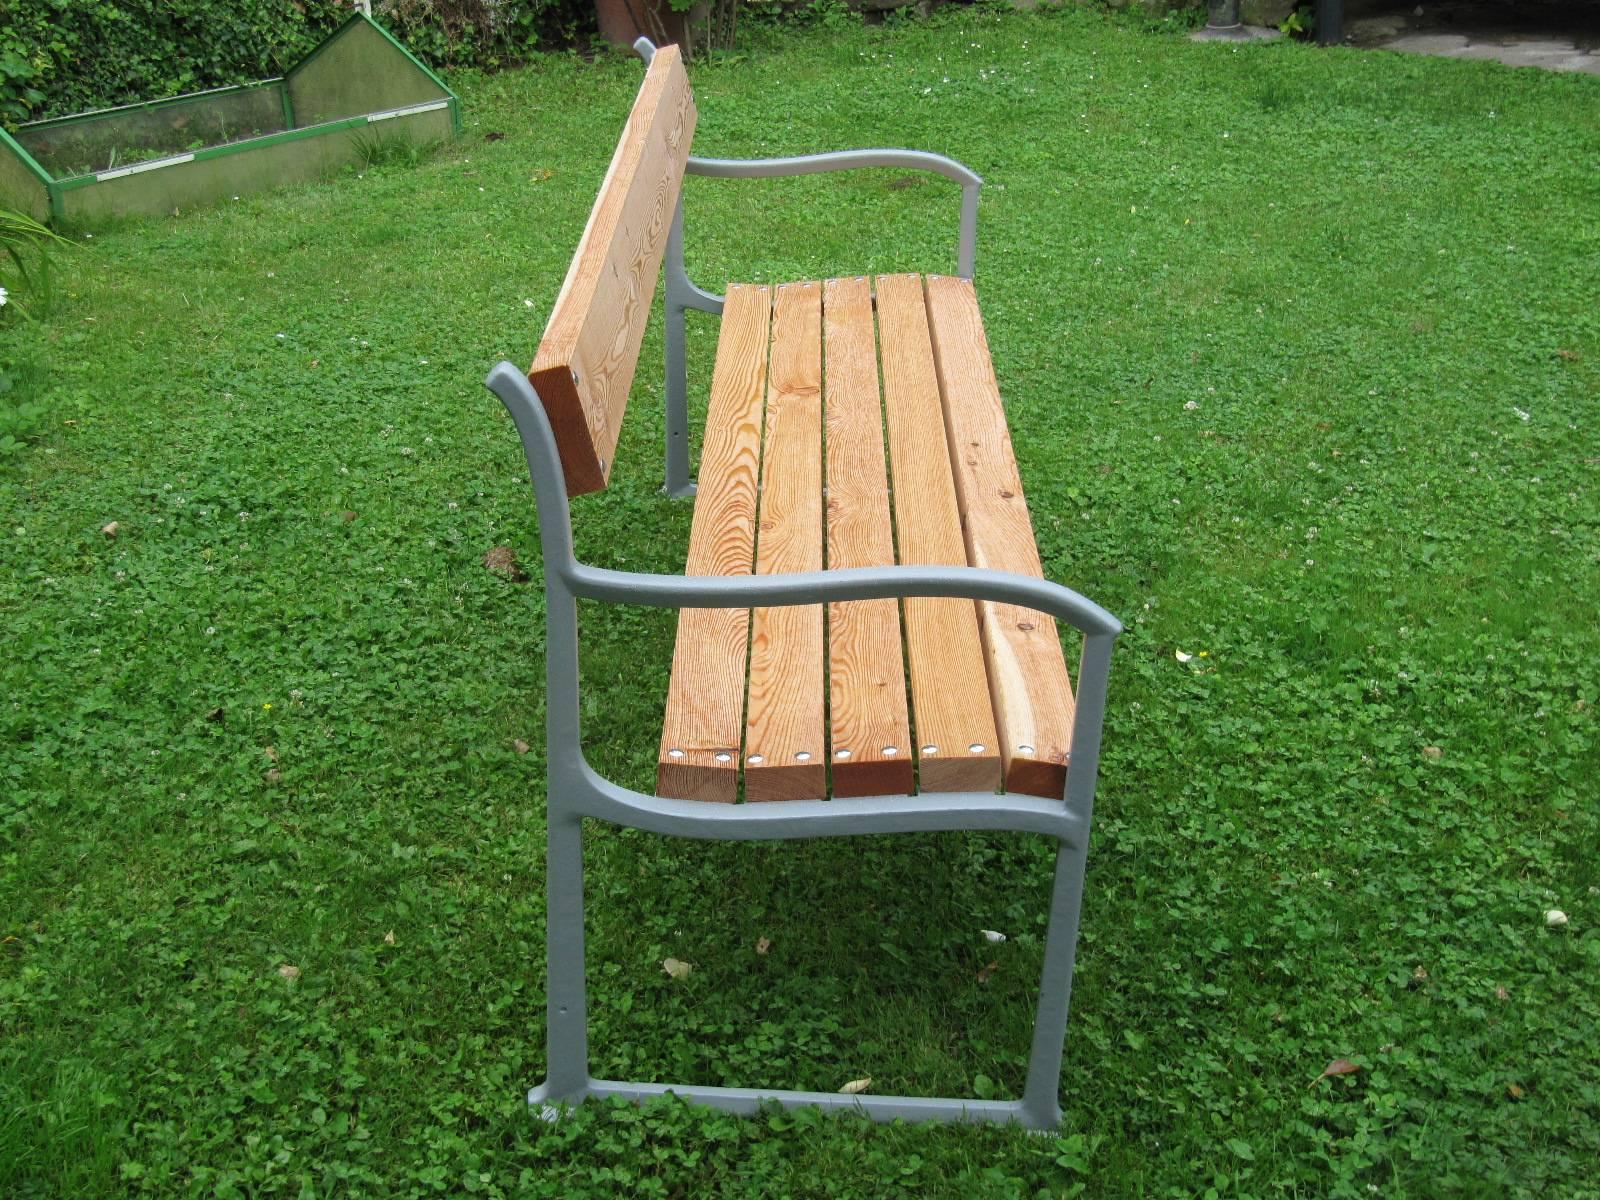 Manufactured by Eisengießerei August Kirschelt’s Erben, Vienna, circa 1900-1905. Lacquered cast iron, wooden slats - from 4 cm thick larch. Fully restored . Total three benches available.
Measures: Height 83 cm, length 180 cm, depth 60 cm, height